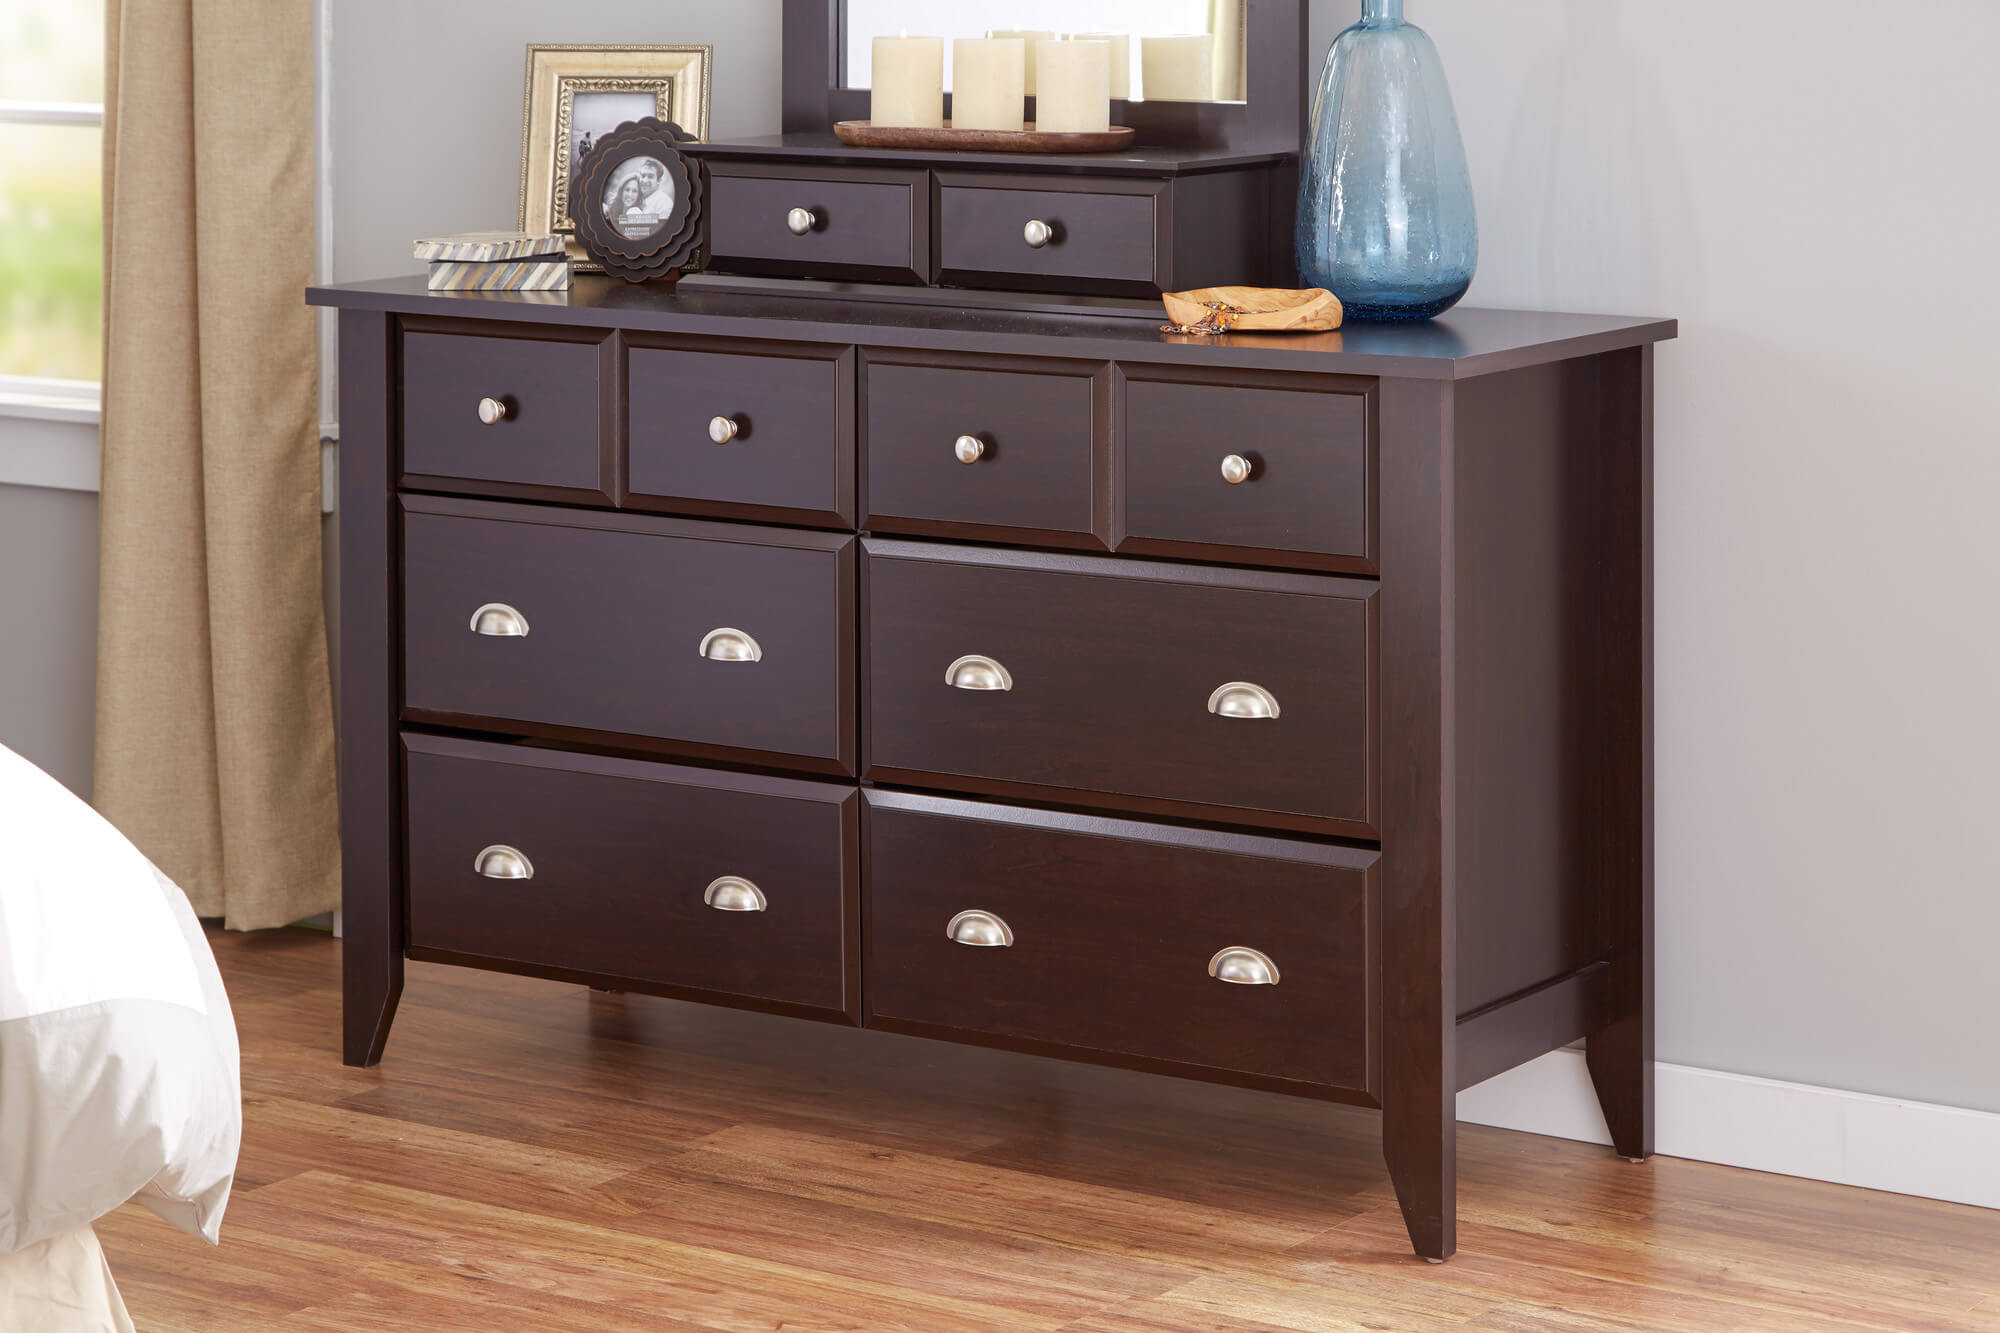 Small Bedroom Chest
 21 Types of Dressers & Chest of Drawers for Your Bedroom